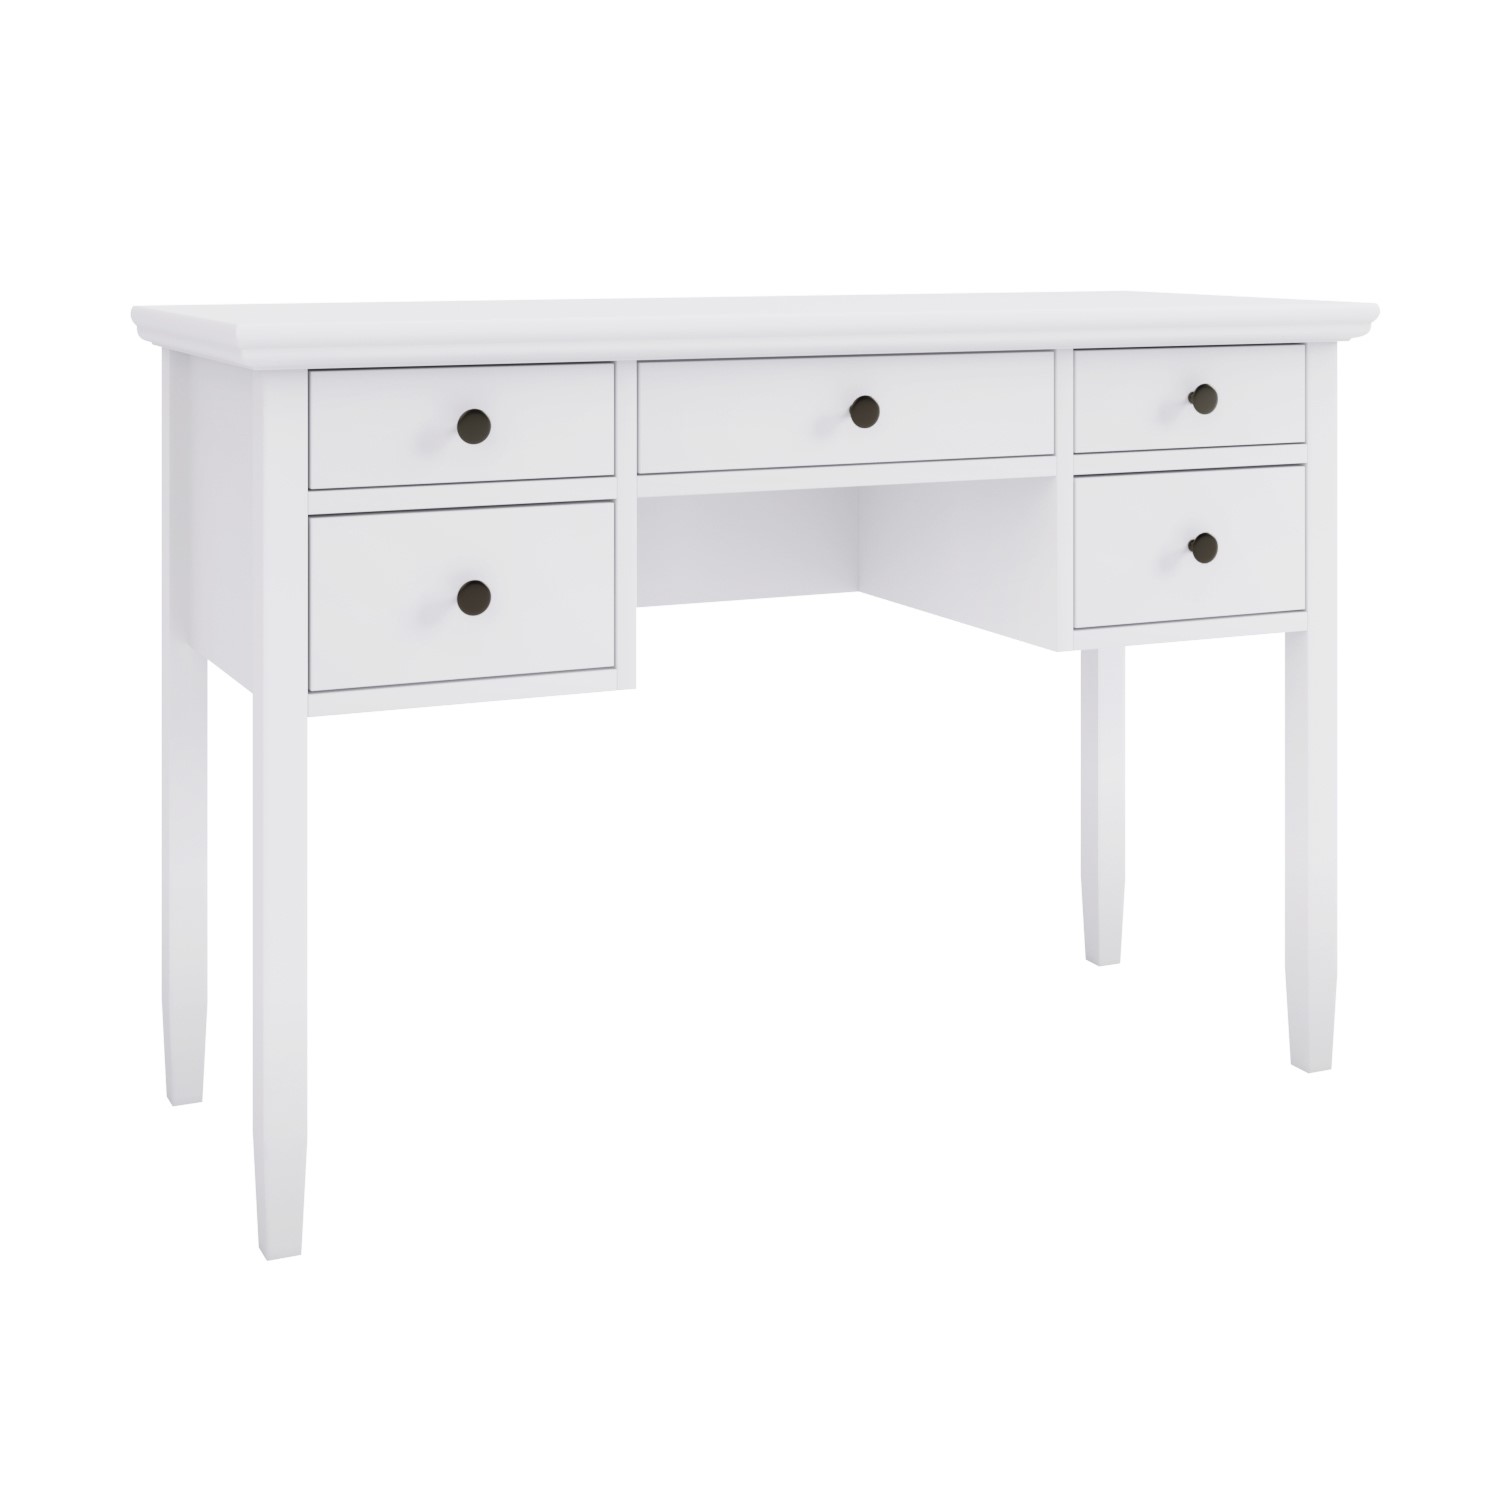 White Wooden Dressing Table with Storage Drawers - Marlowe - Furniture123